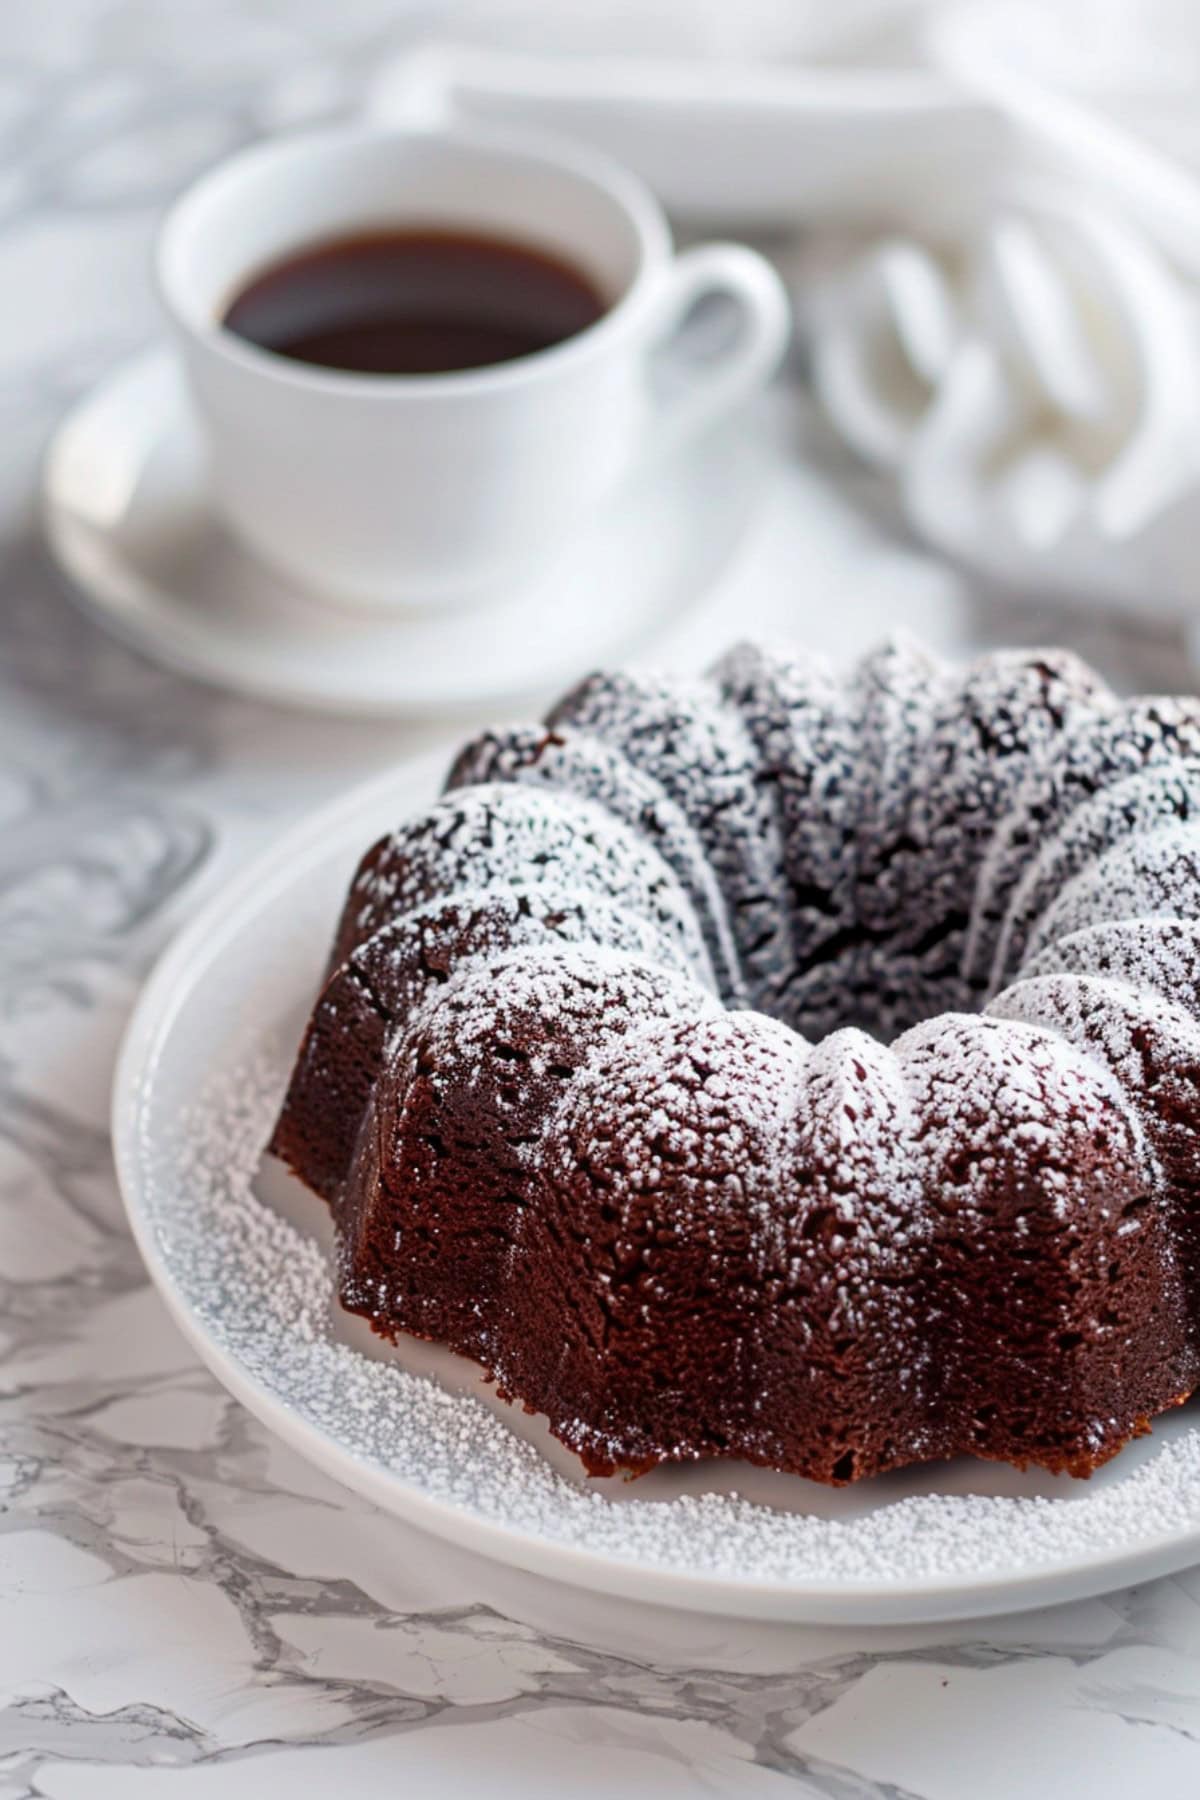 Too Much Chocolate Cake Bundt on a Cake Plate, Dusted with Powdered Sugar, with a Mug of Coffee in the Background